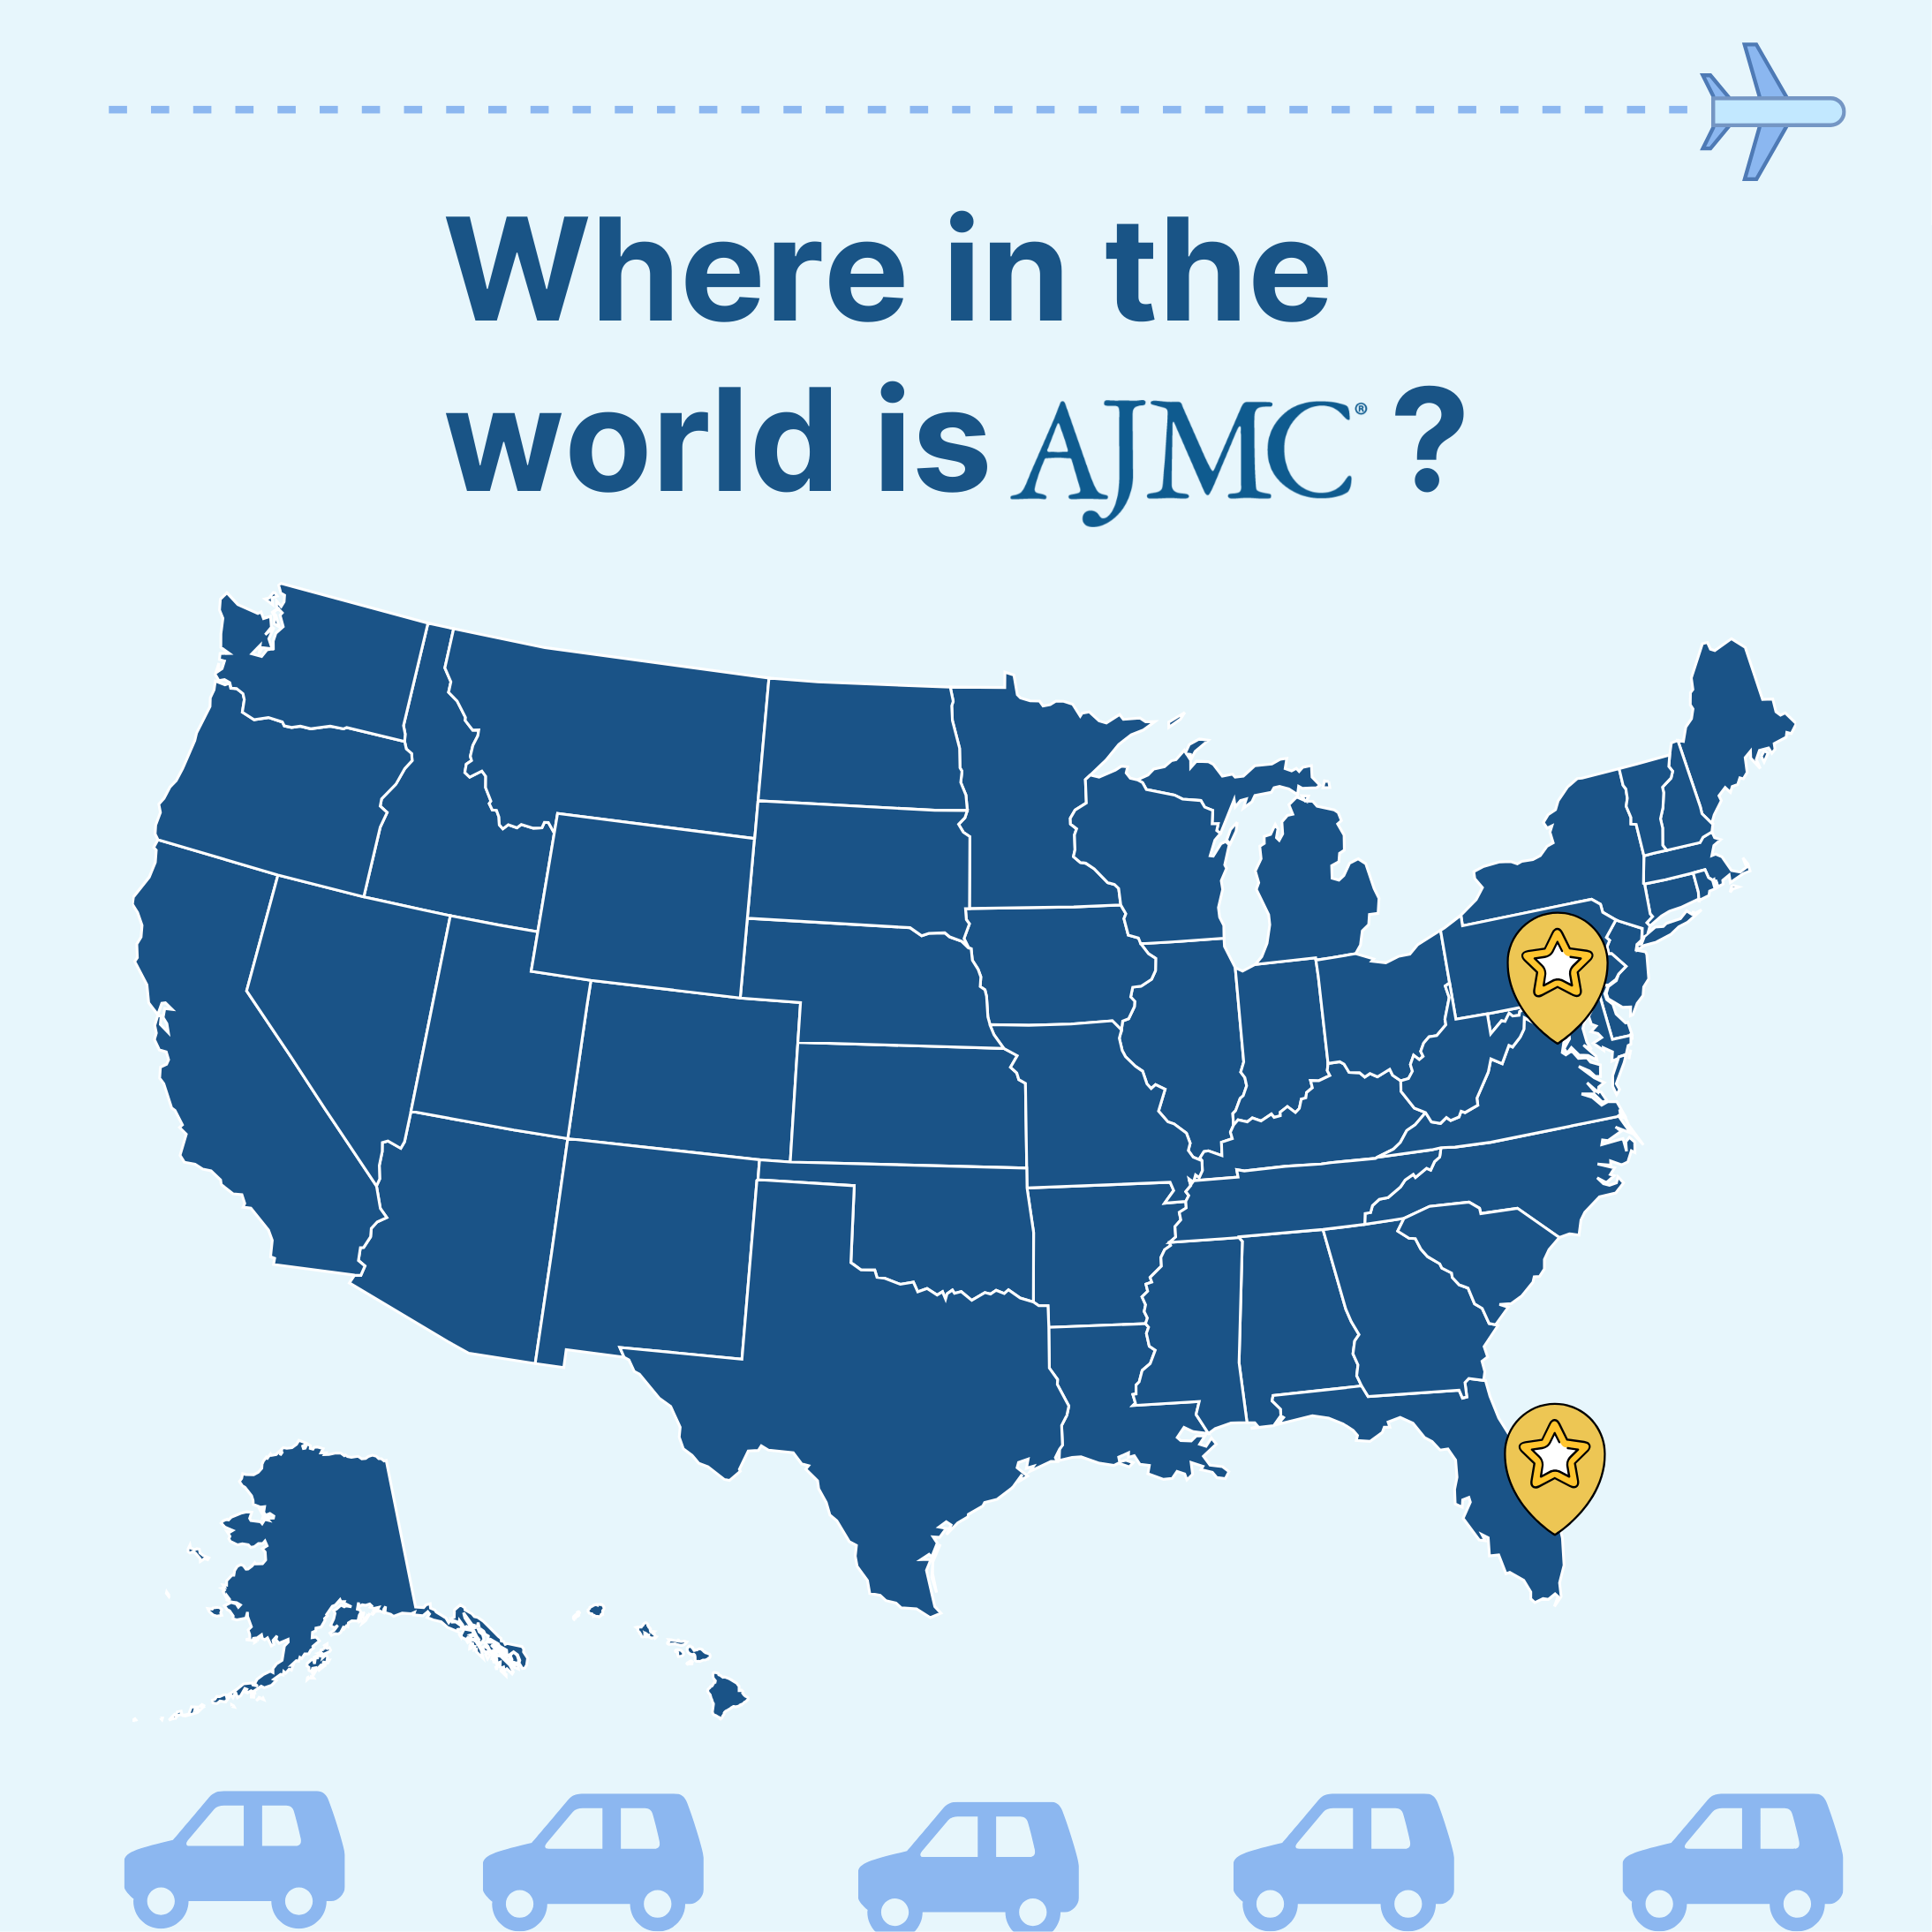 where in the world is AJMC?